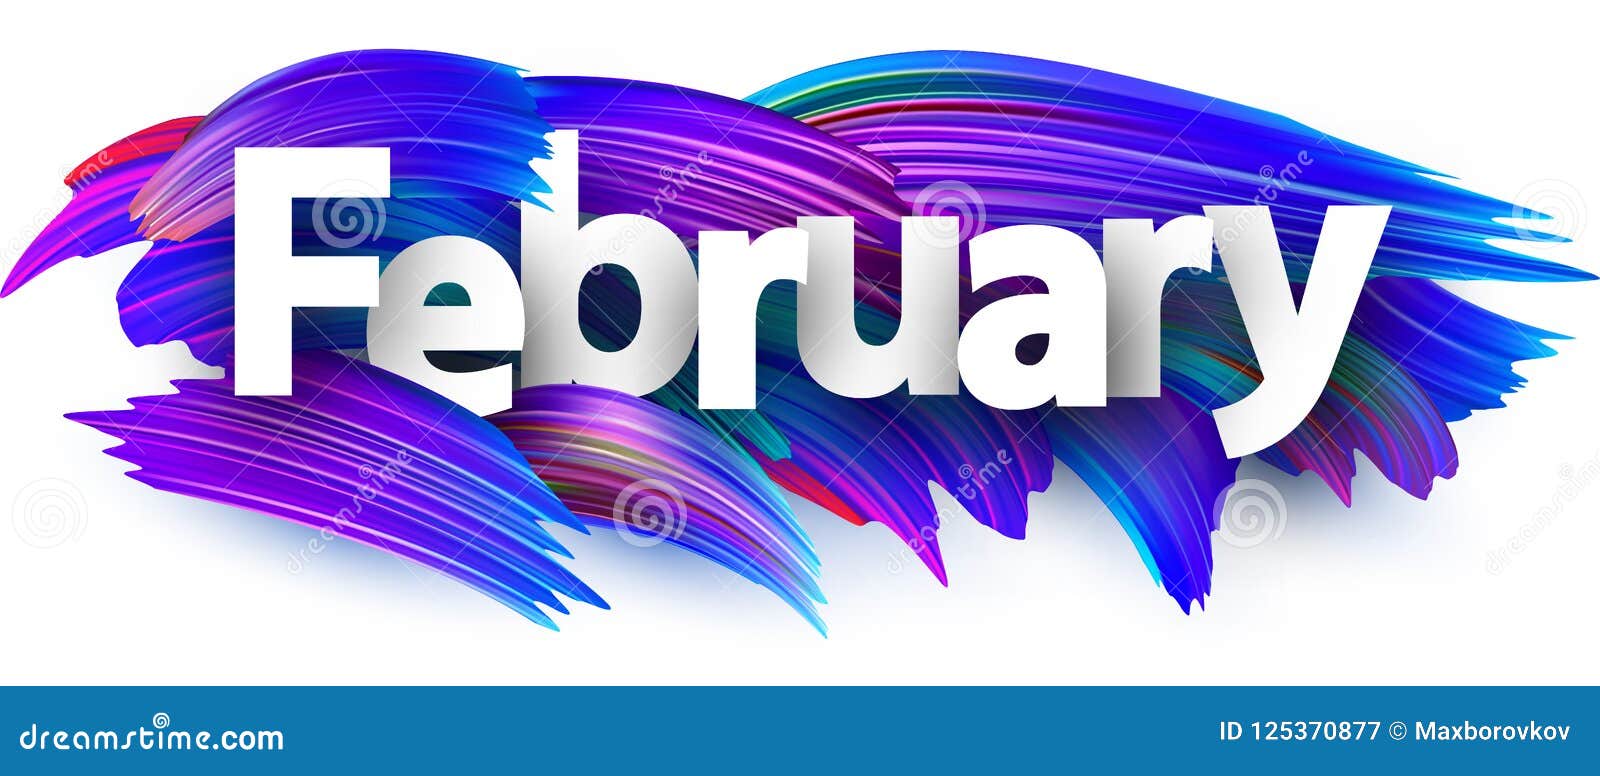 february banner with blue brush strokes.